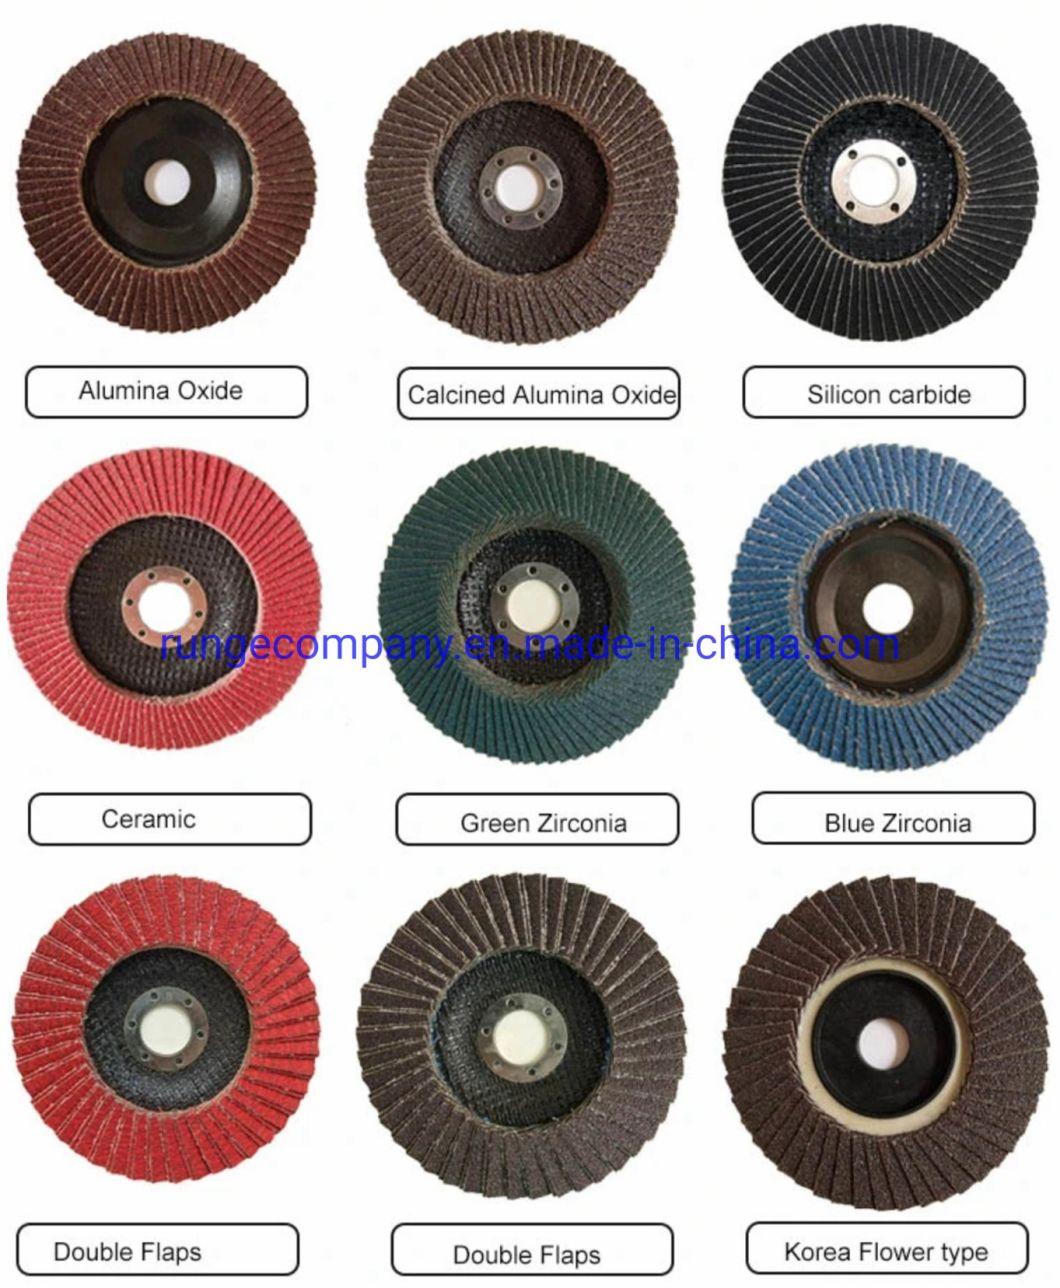 Power Tool 7 Inch Abrasive Grinding Wheel for 7" + Grinders Easily and Smoothly Grinding All Steel and Metal